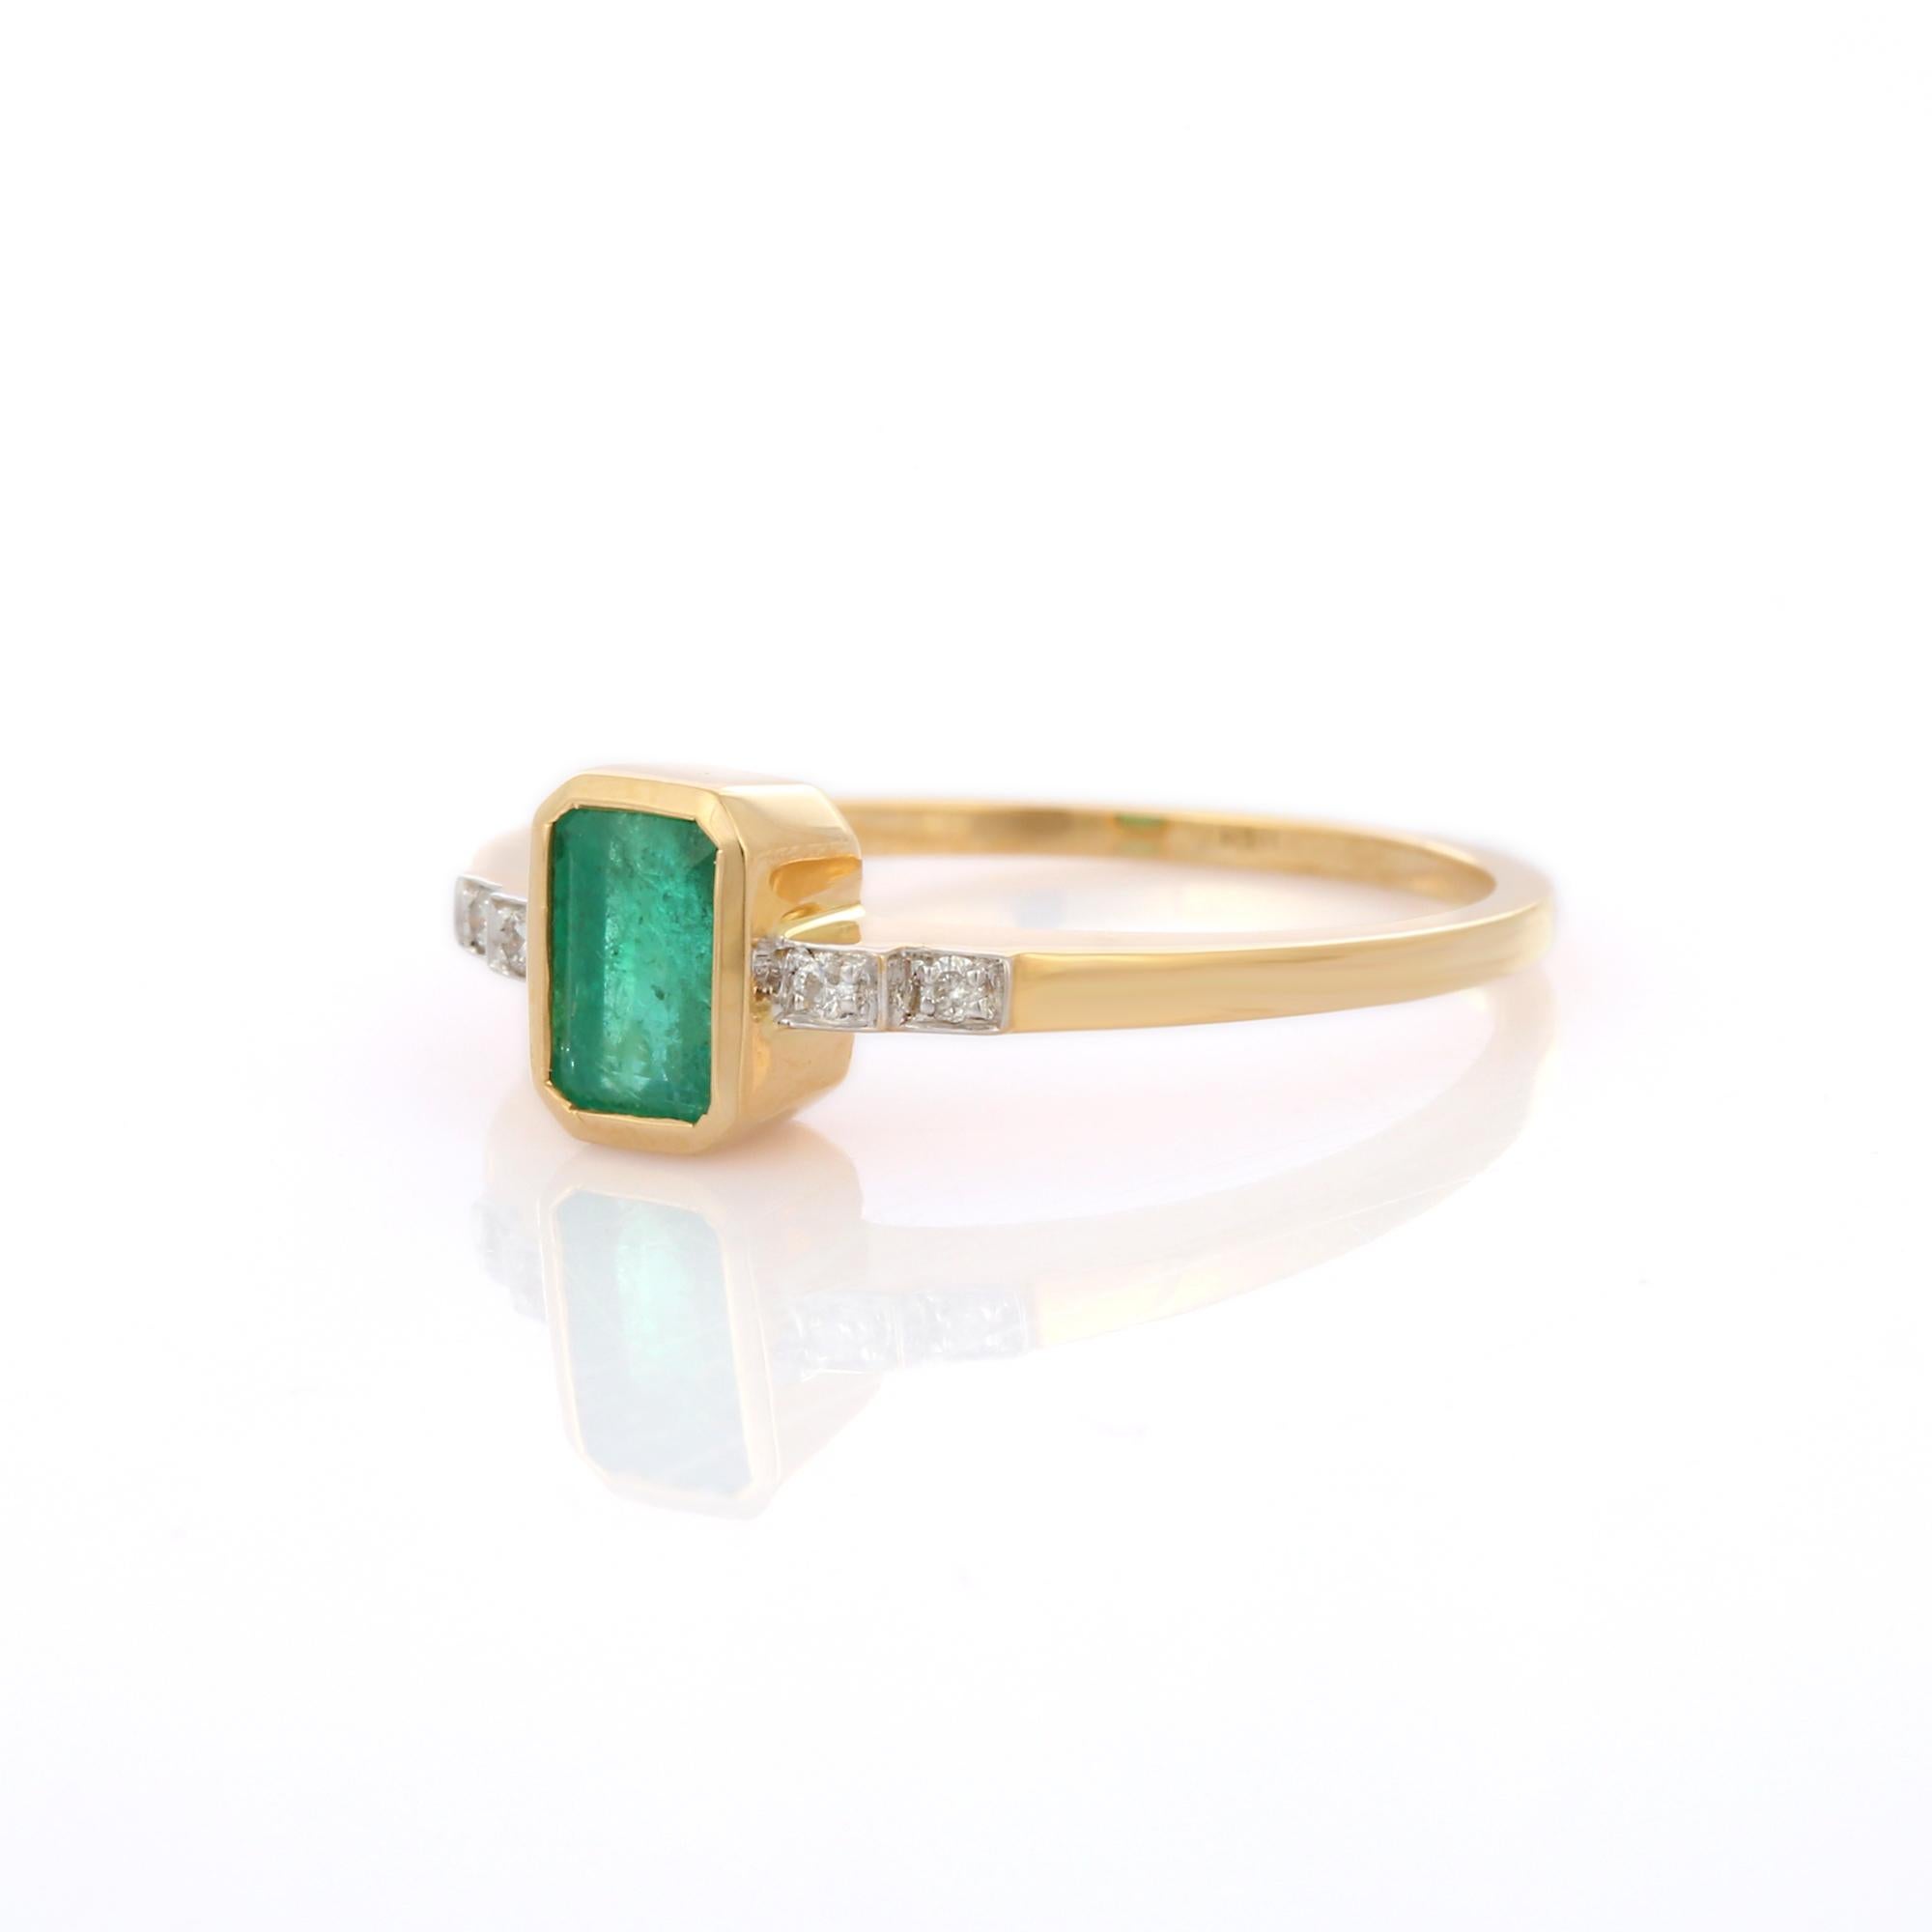 For Sale:  18K Yellow Gold Octagon Cut Emerald and Diamond Stackable Ring, Gift for Her 4